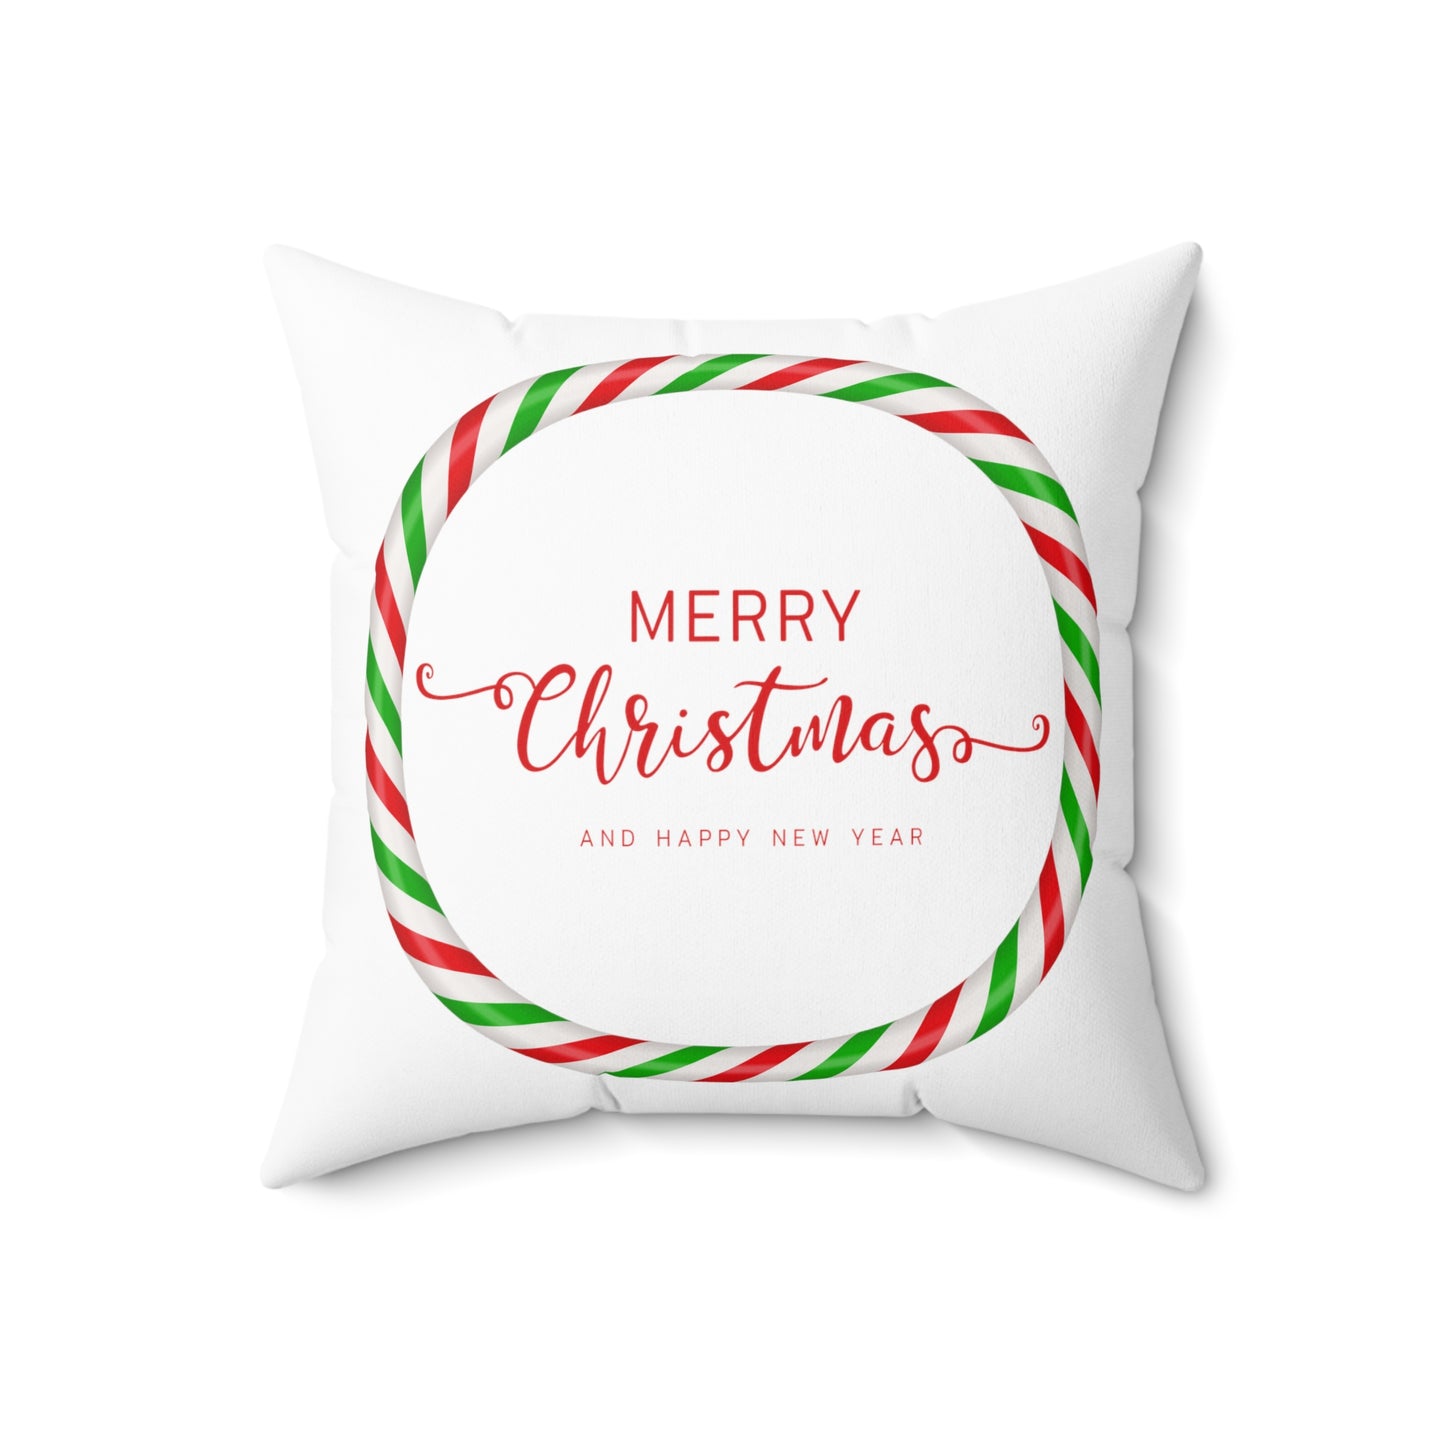 Merry Christmas and Happy New Year Printed Sqaure Pillow